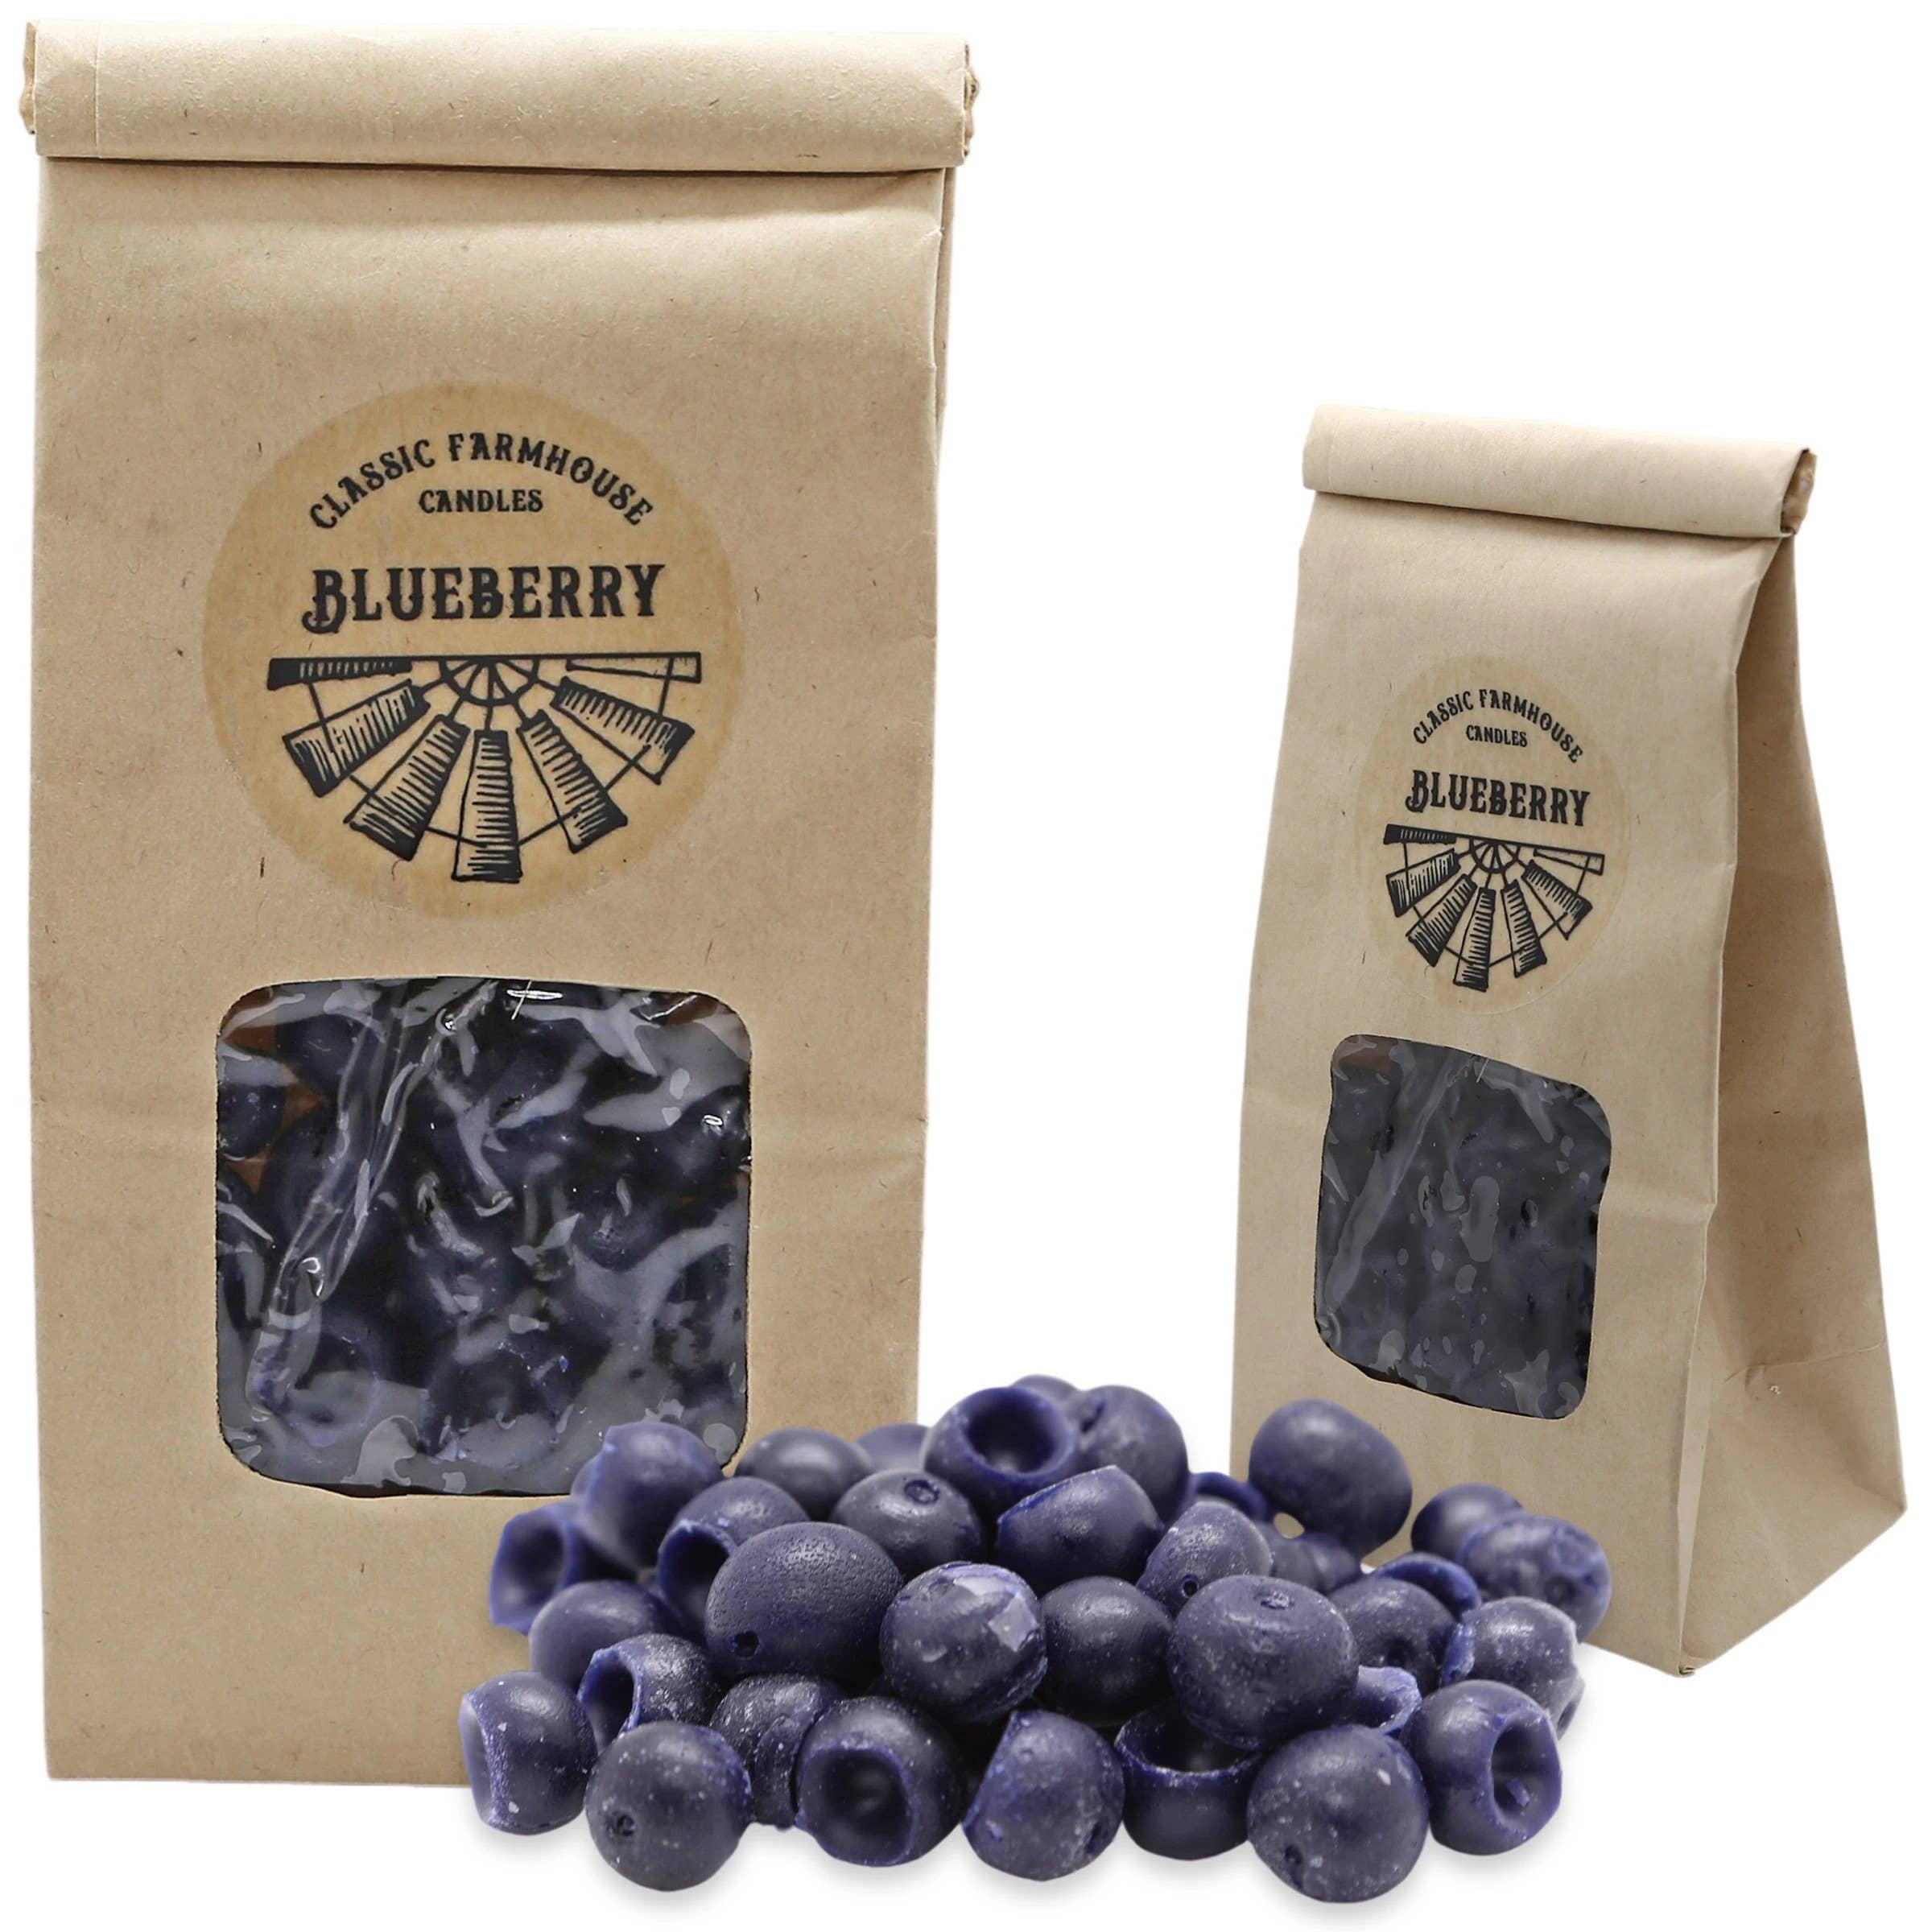 BLUEBERRY Snacks - Classic Farmhouse Candle